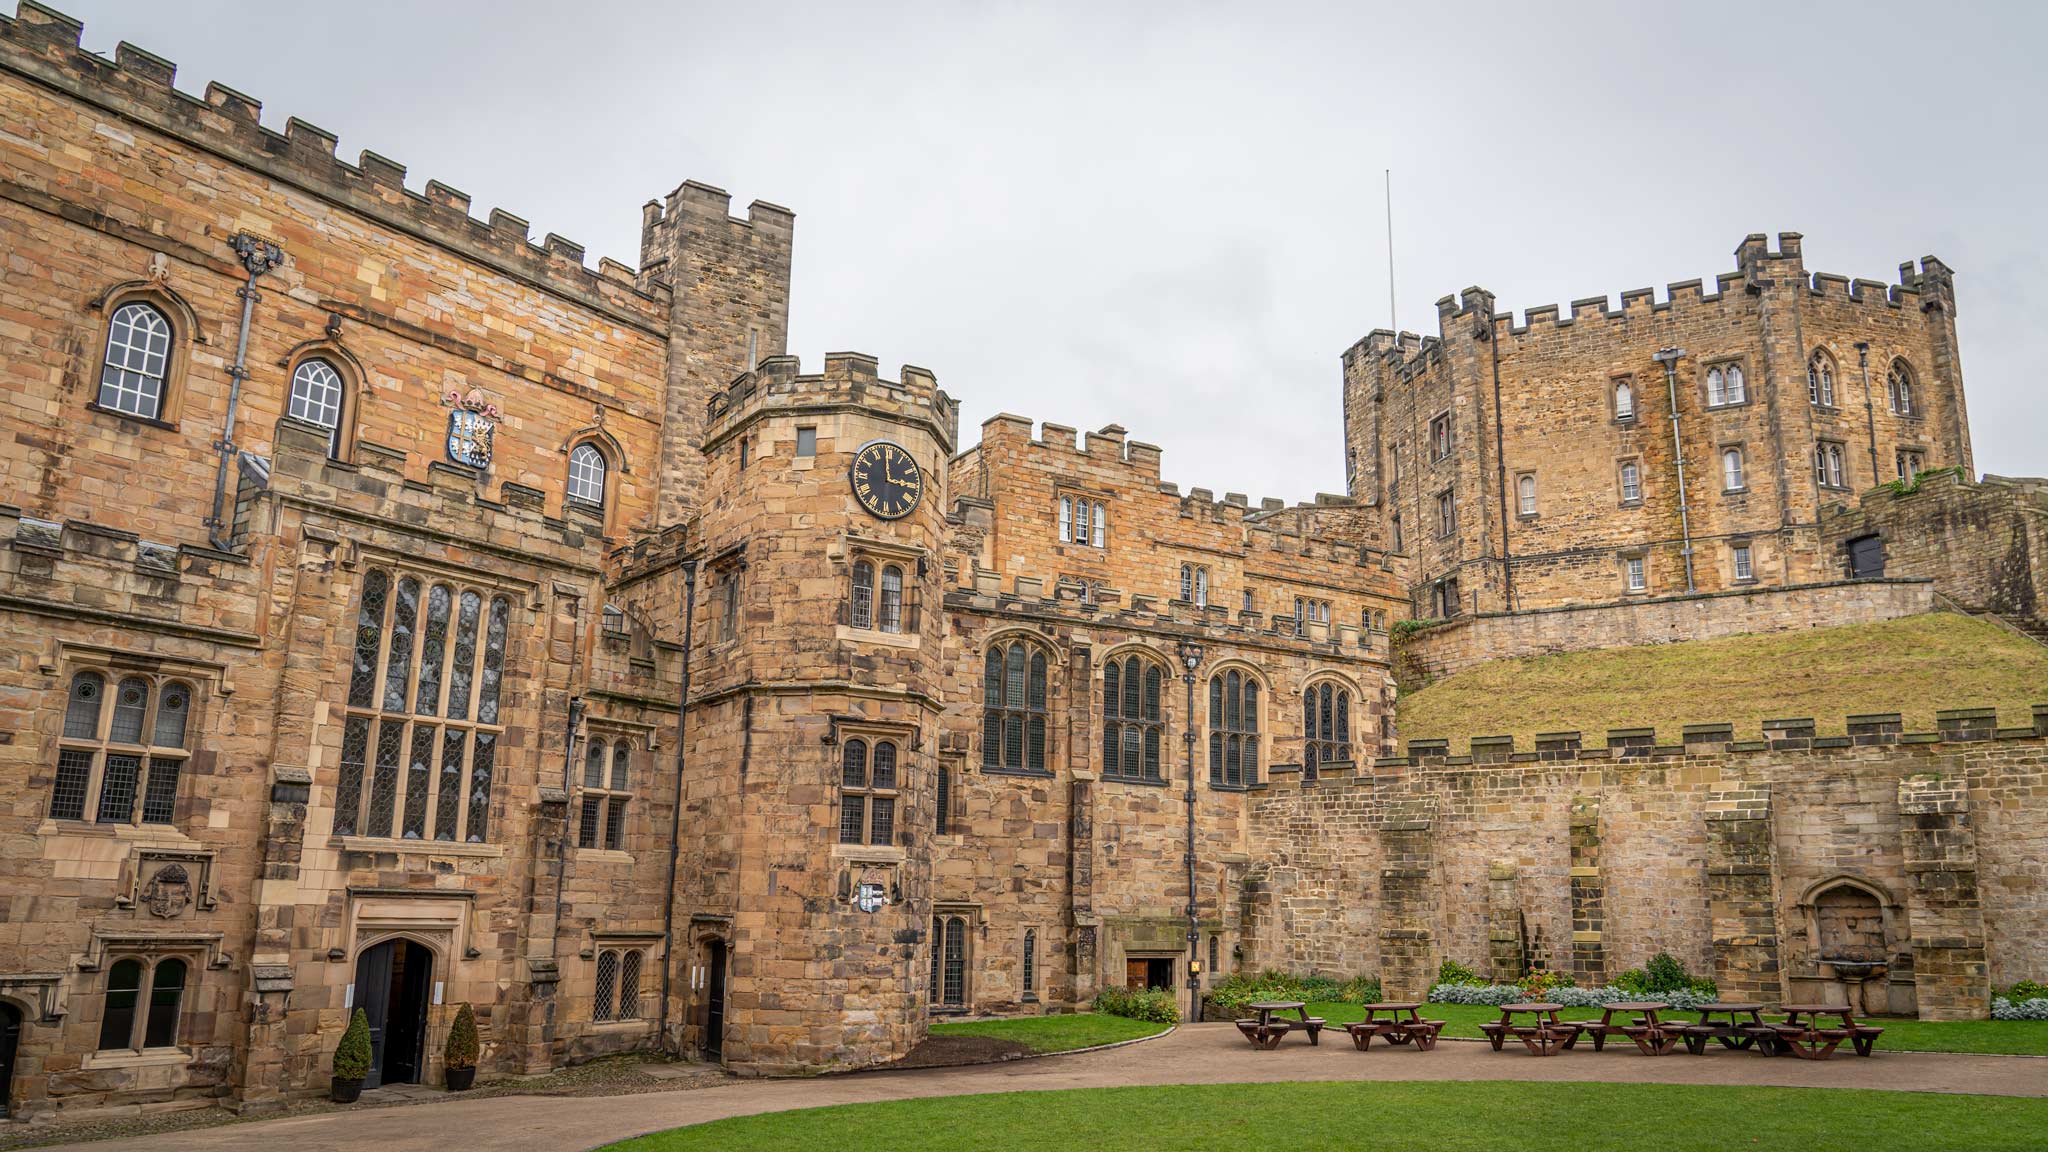 Outside view of Durham Castle with an octagonal tower to the side